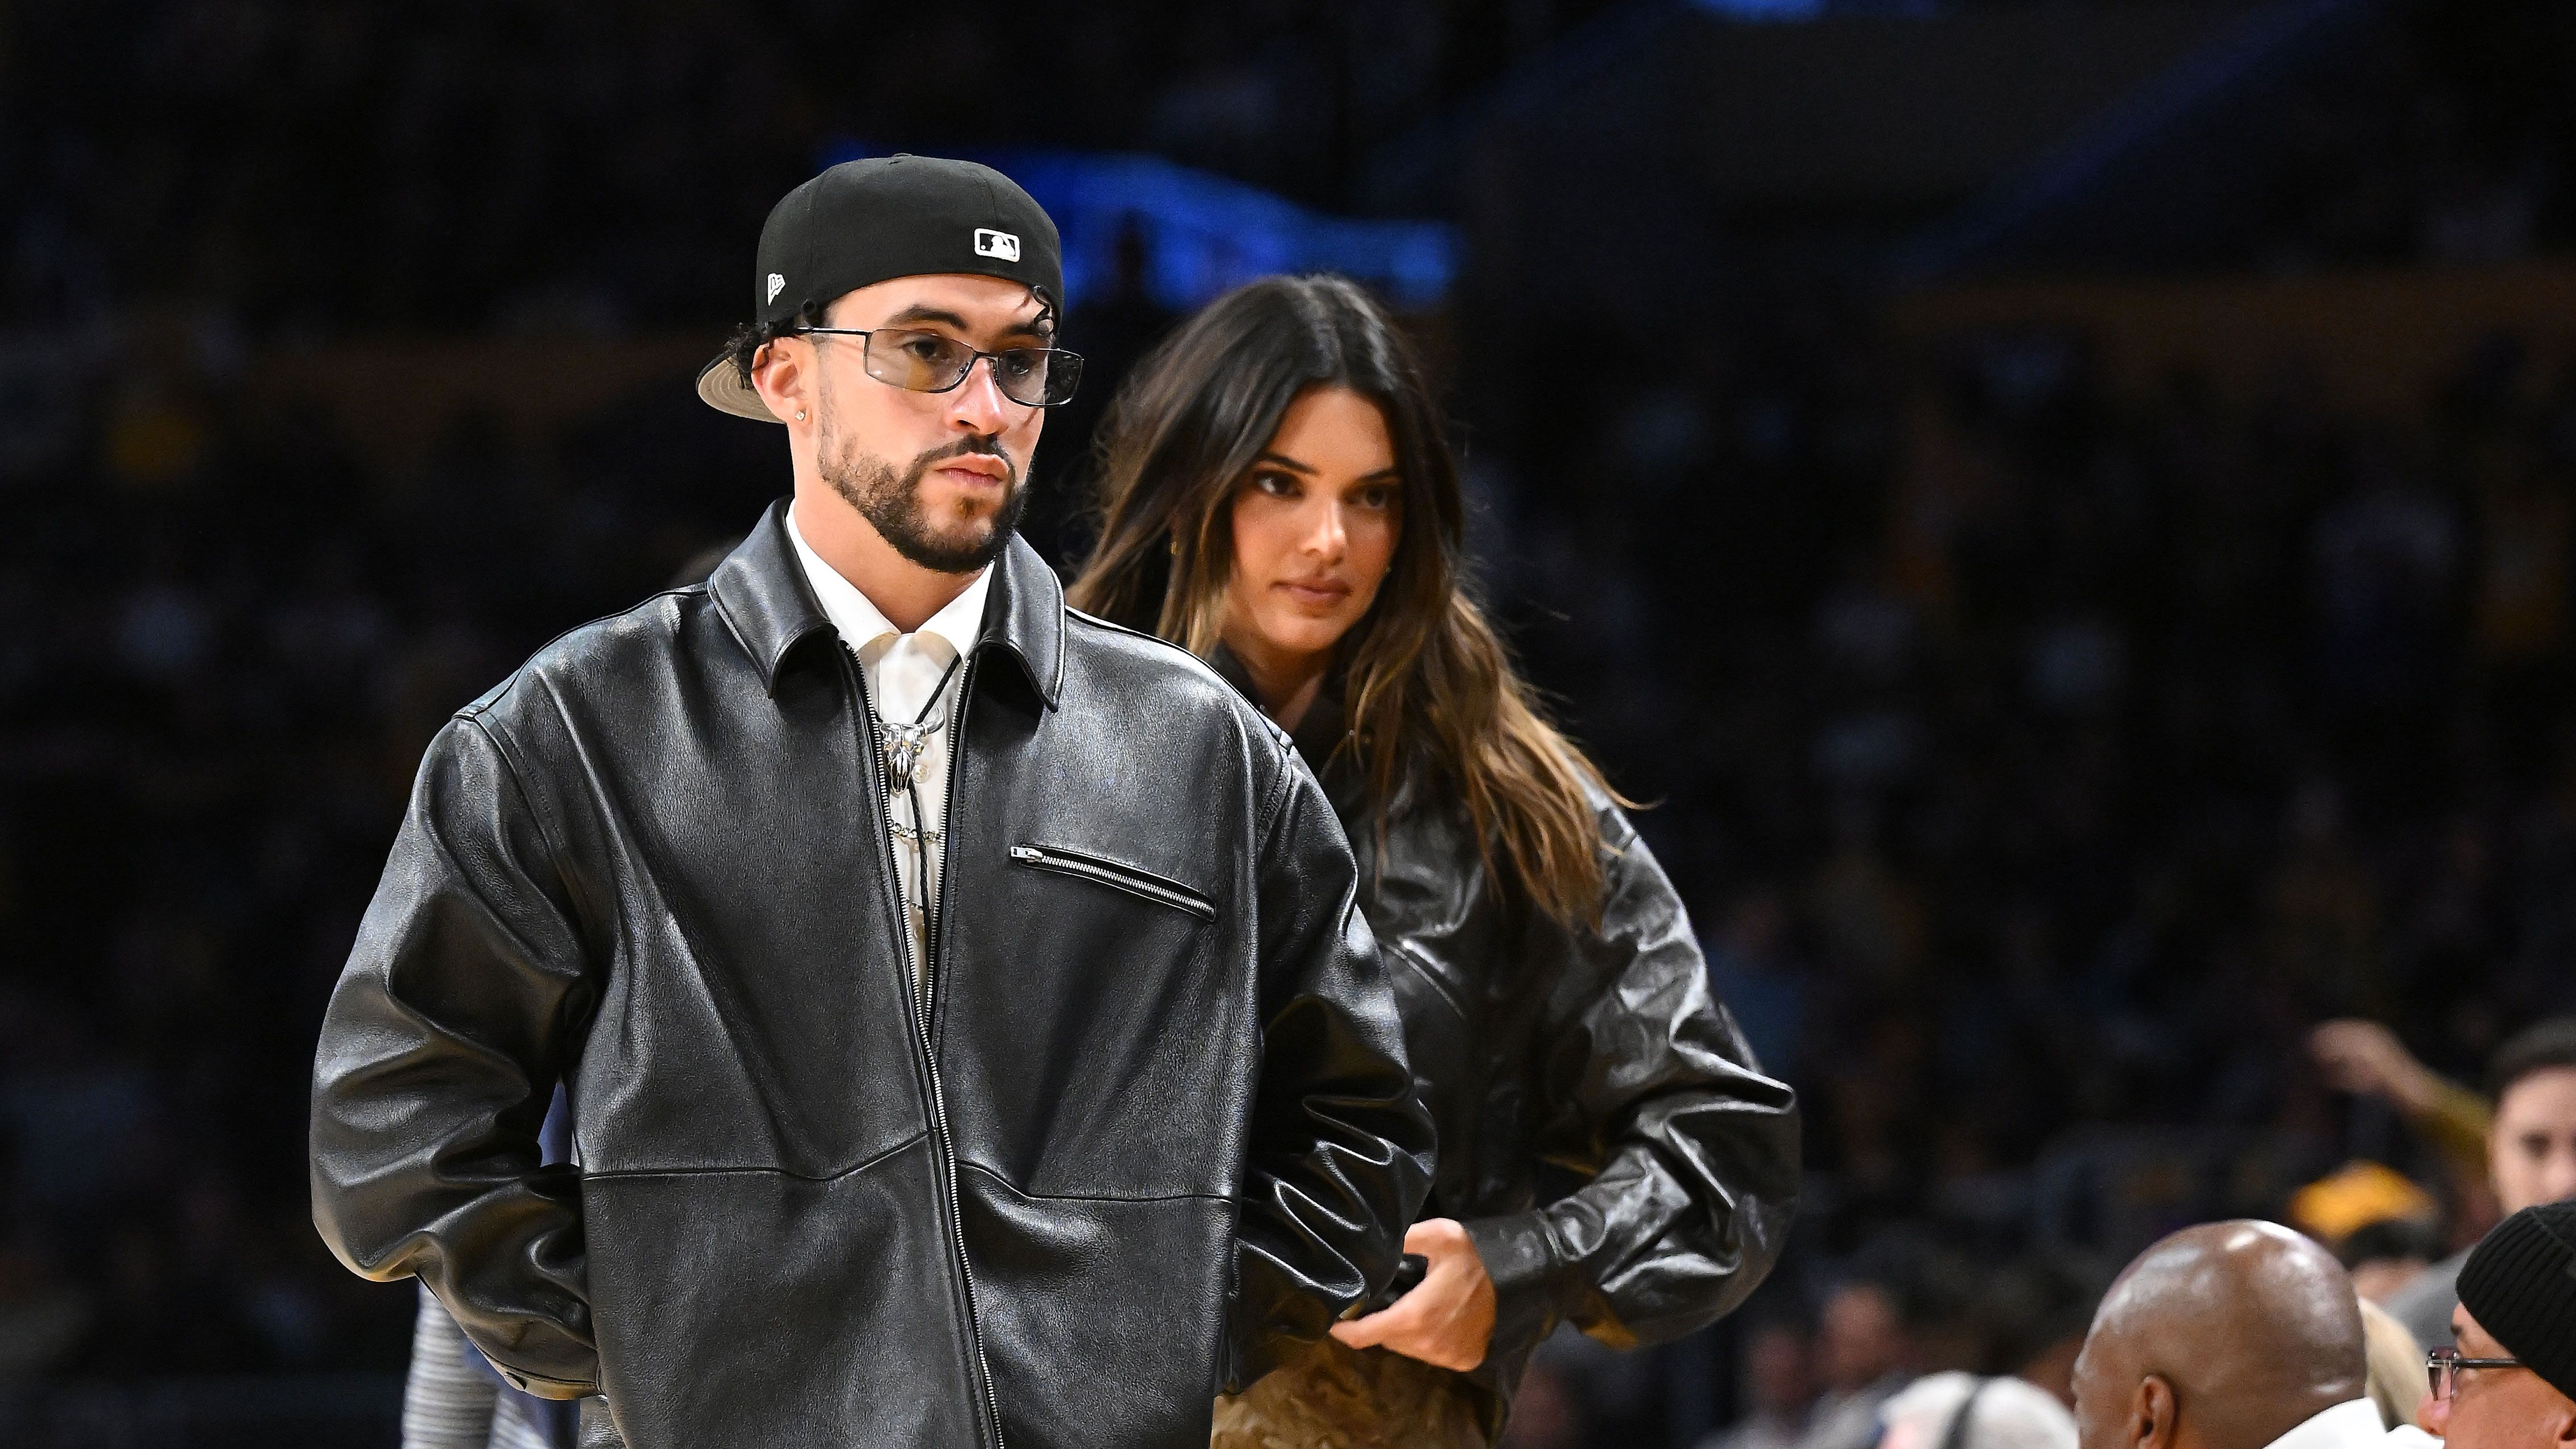 Are Kendall Jenner and Bad Bunny Dating?